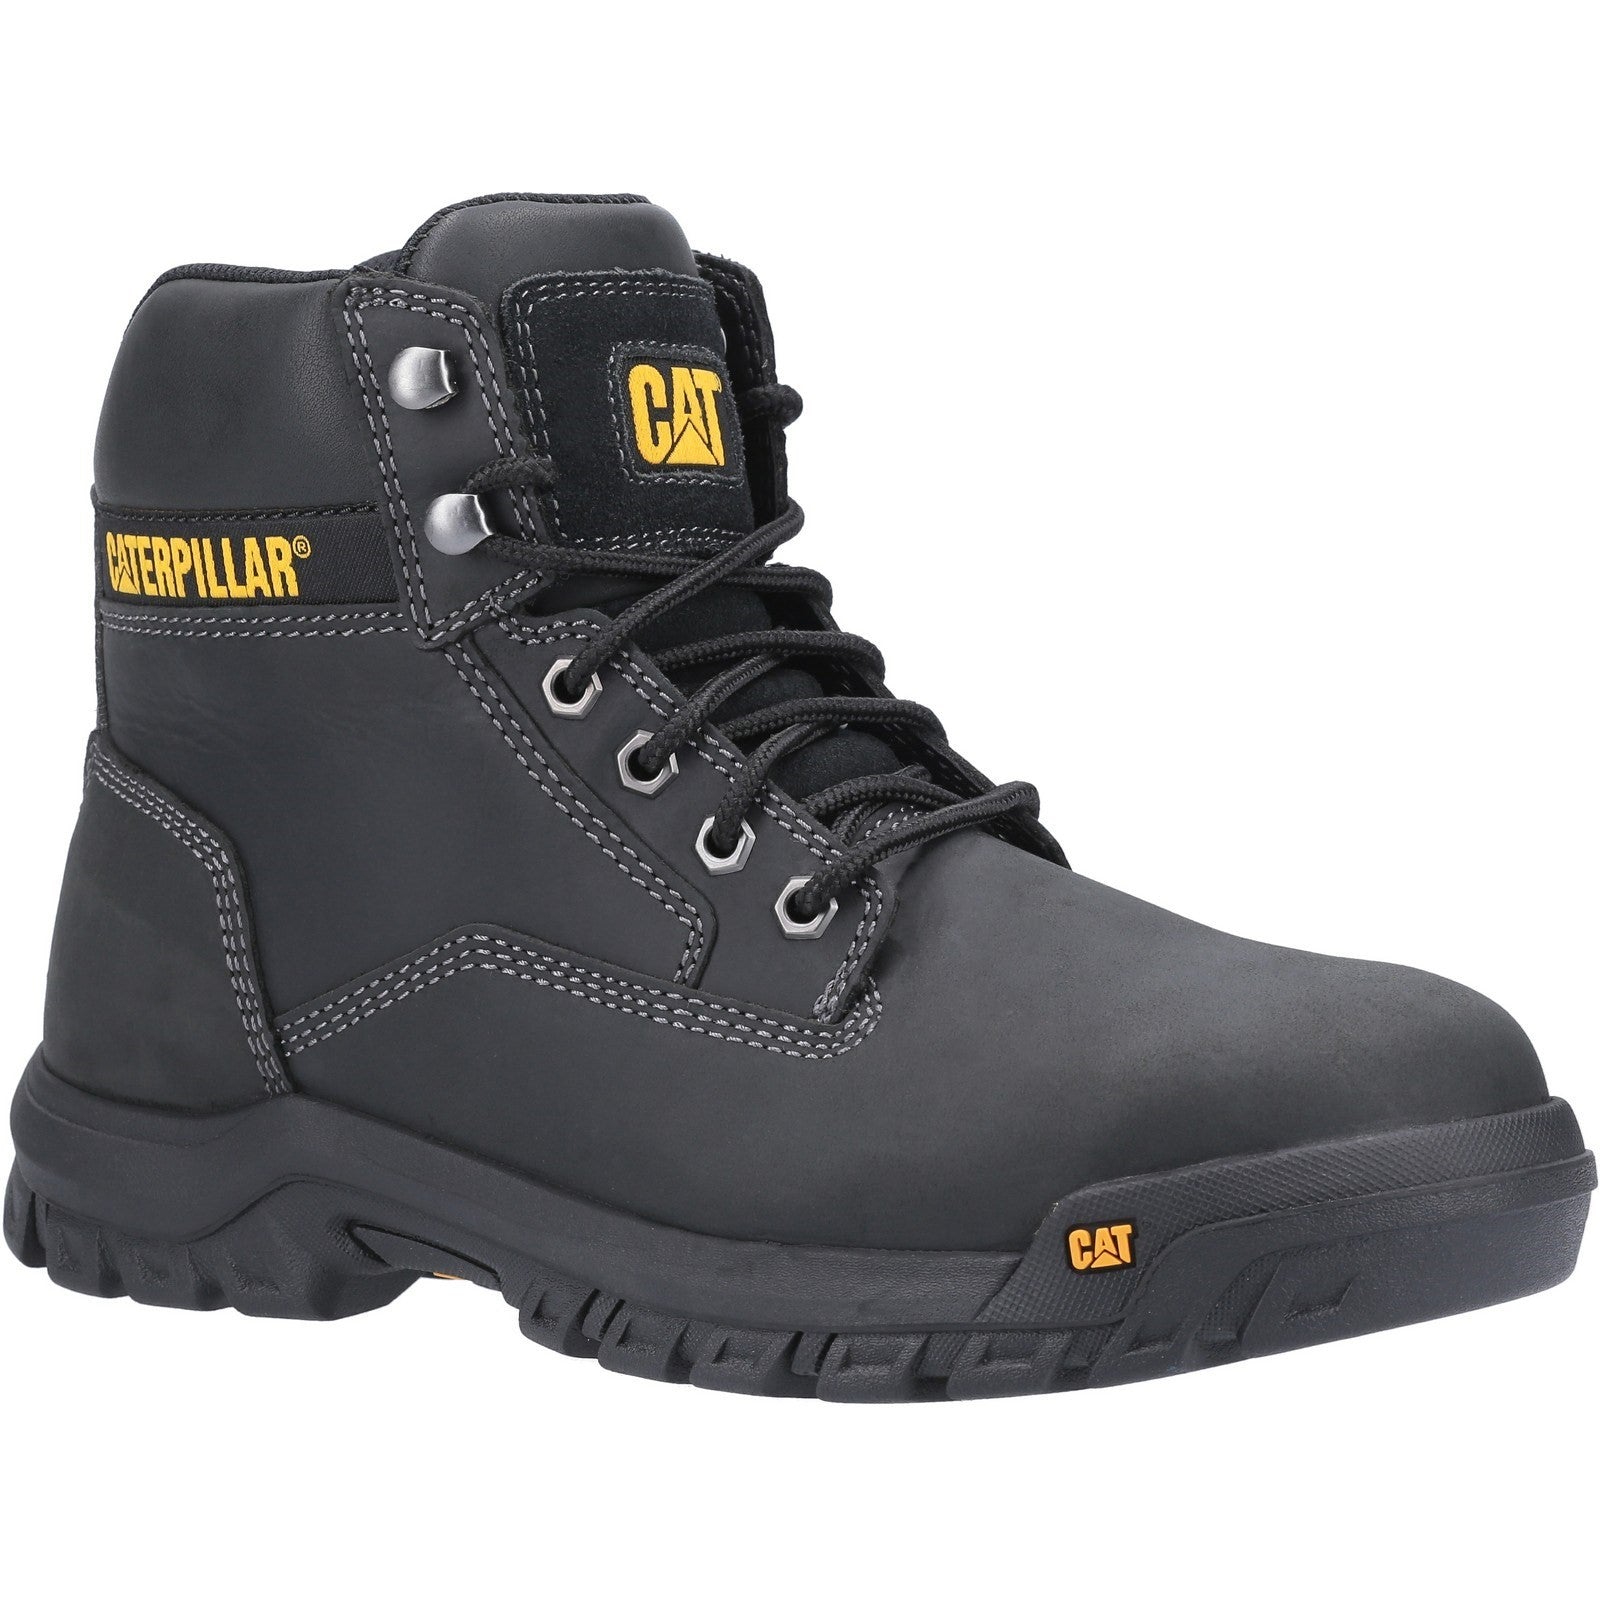 Caterpillar Median S3 Lace Up Safety Boot